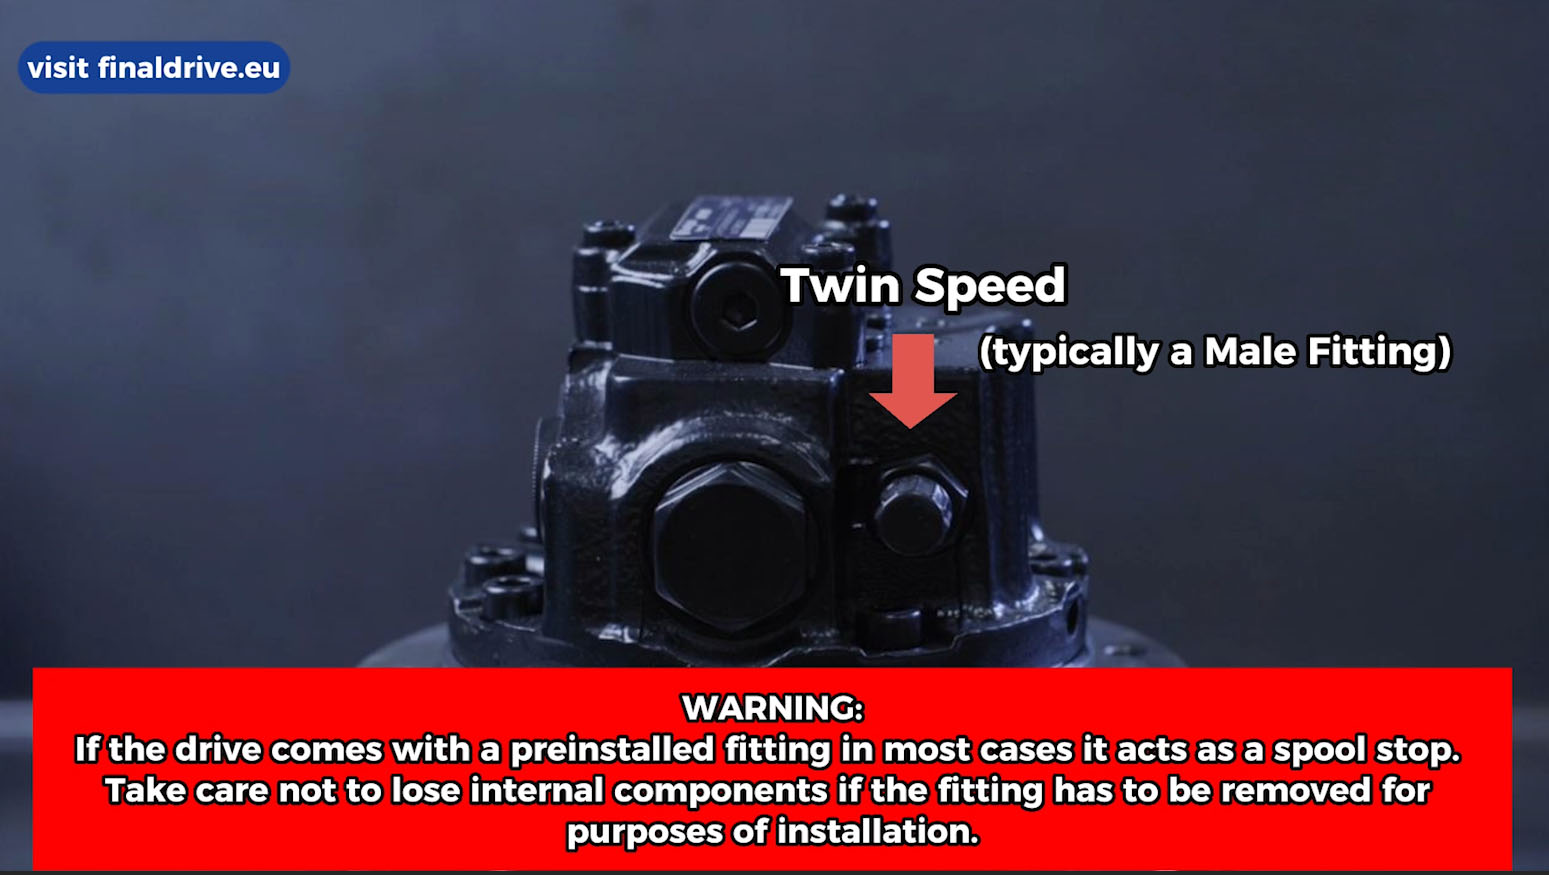 Twin Speed Warning - If the drive comes with a preinstalled fitting in most cases it acts as a spool stop. Take care not to lose internal components if the fitting has to be removed for purposes of installation.